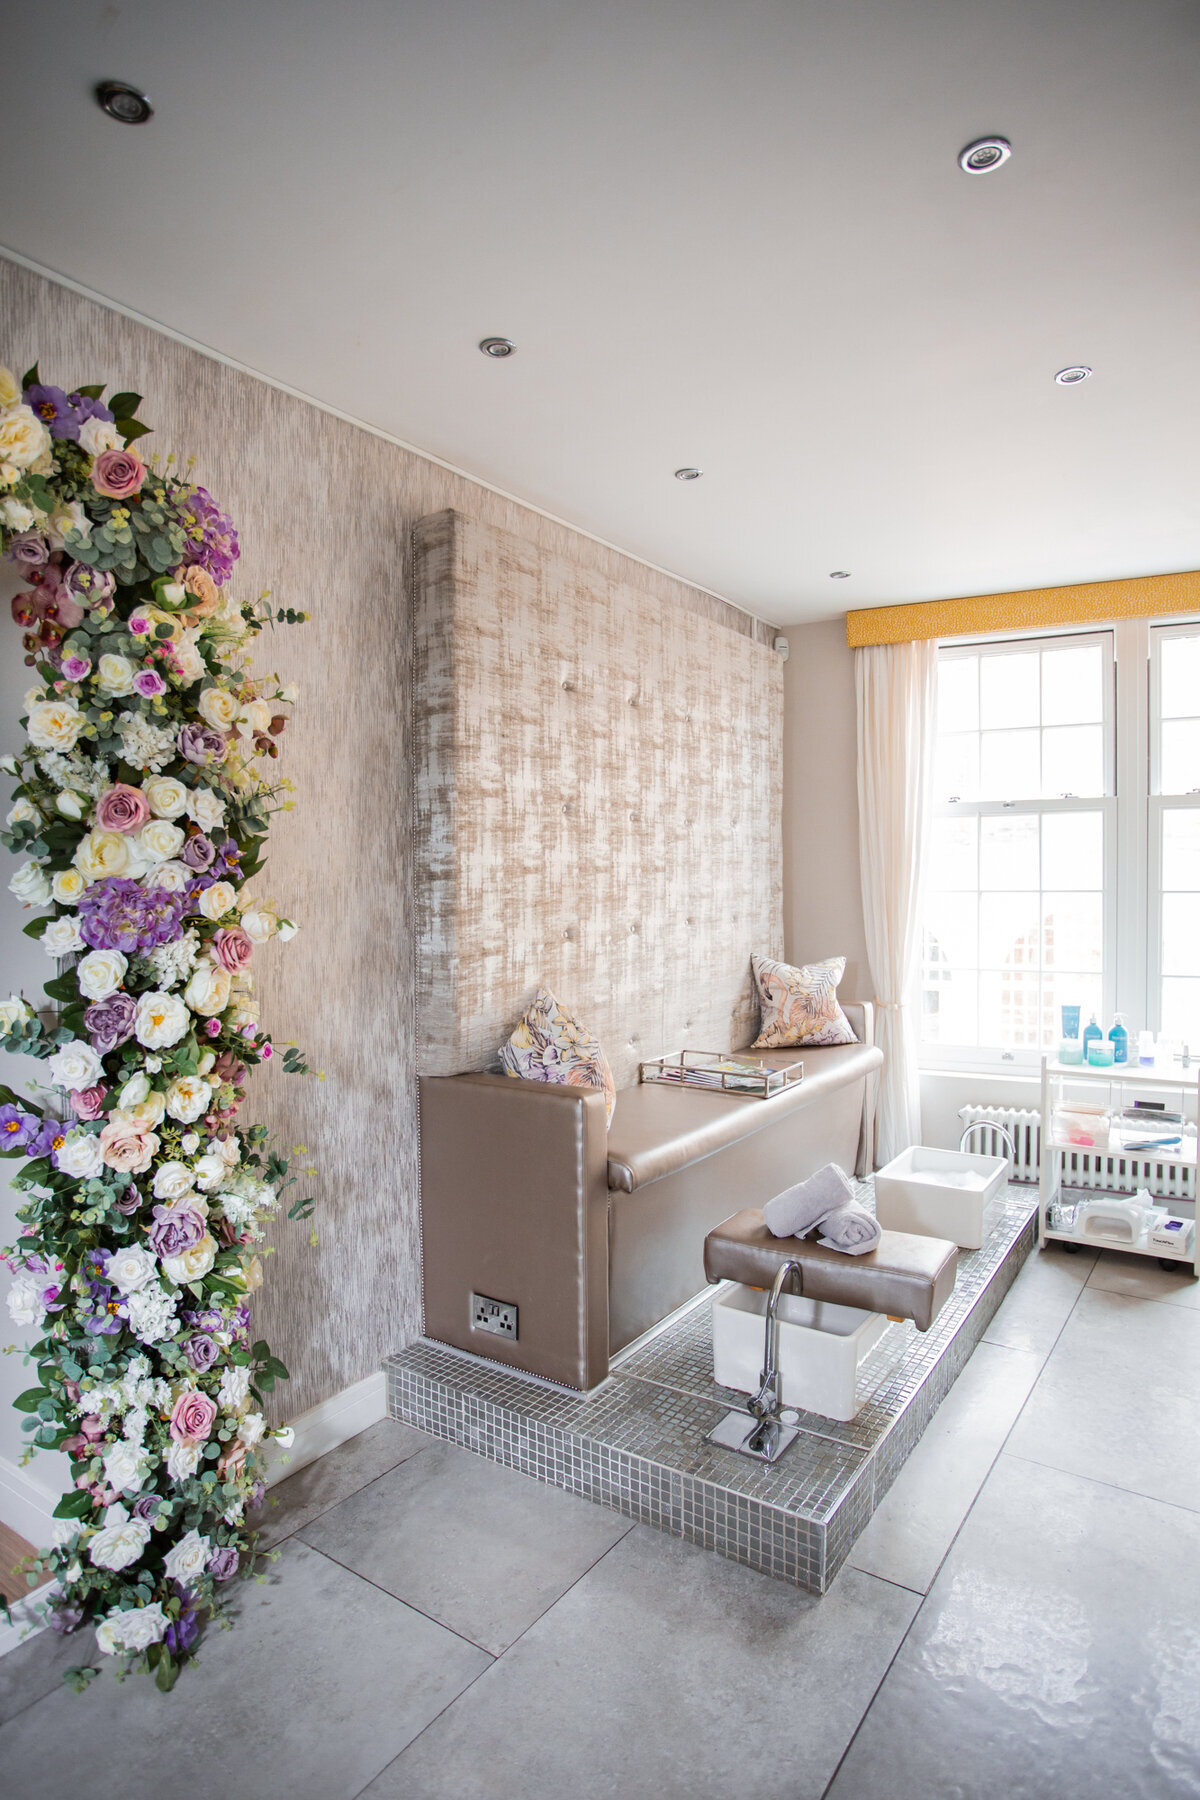 About - Floral decorated pedicure area  at Missy's Beauty Nantwich